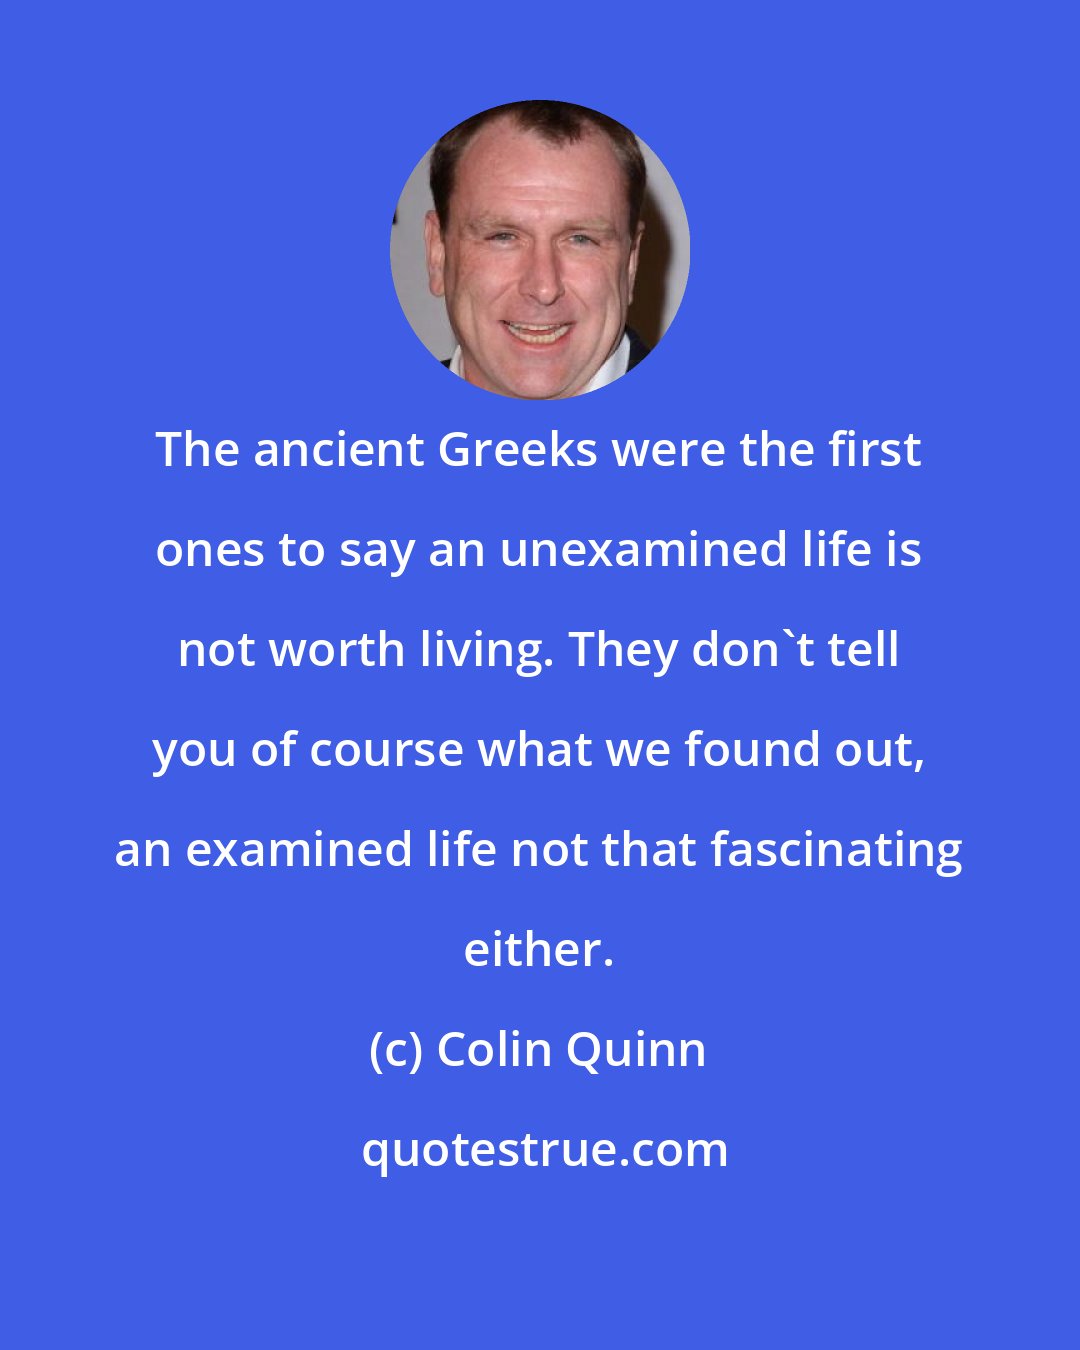 Colin Quinn: The ancient Greeks were the first ones to say an unexamined life is not worth living. They don't tell you of course what we found out, an examined life not that fascinating either.